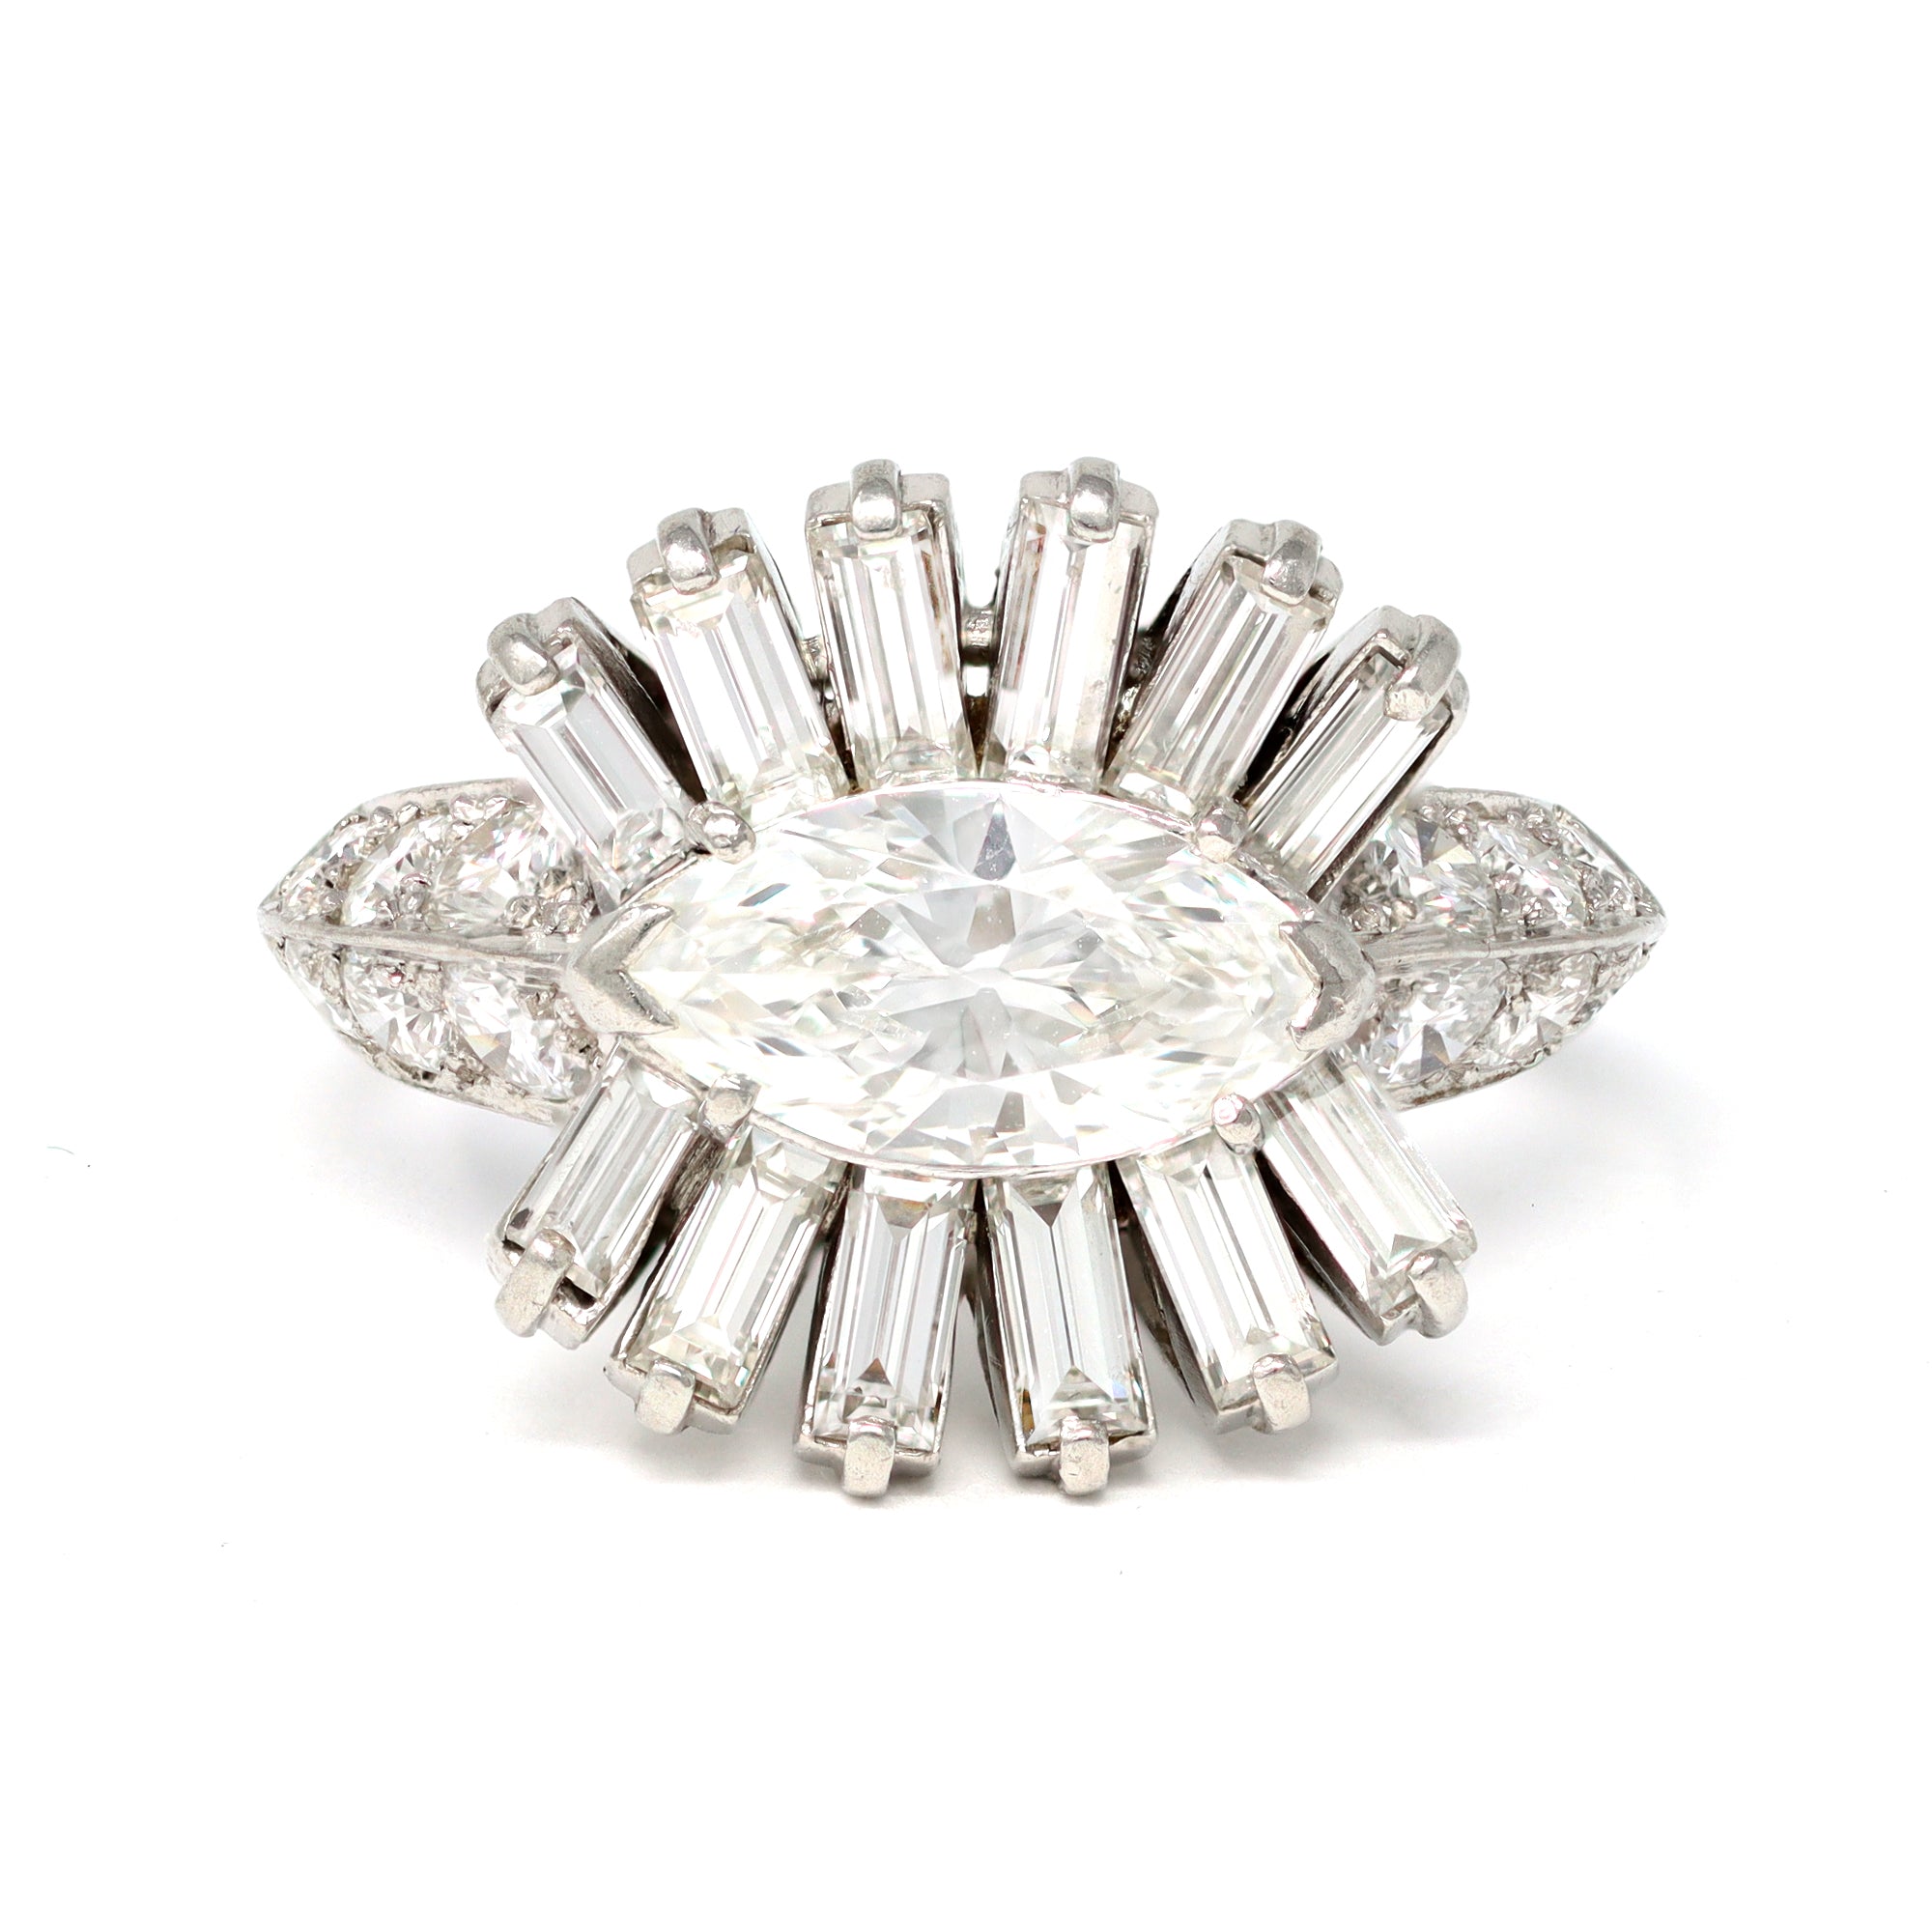 French Platinum Marquise Diamond Cocktail Ring, Circa 1950 top view